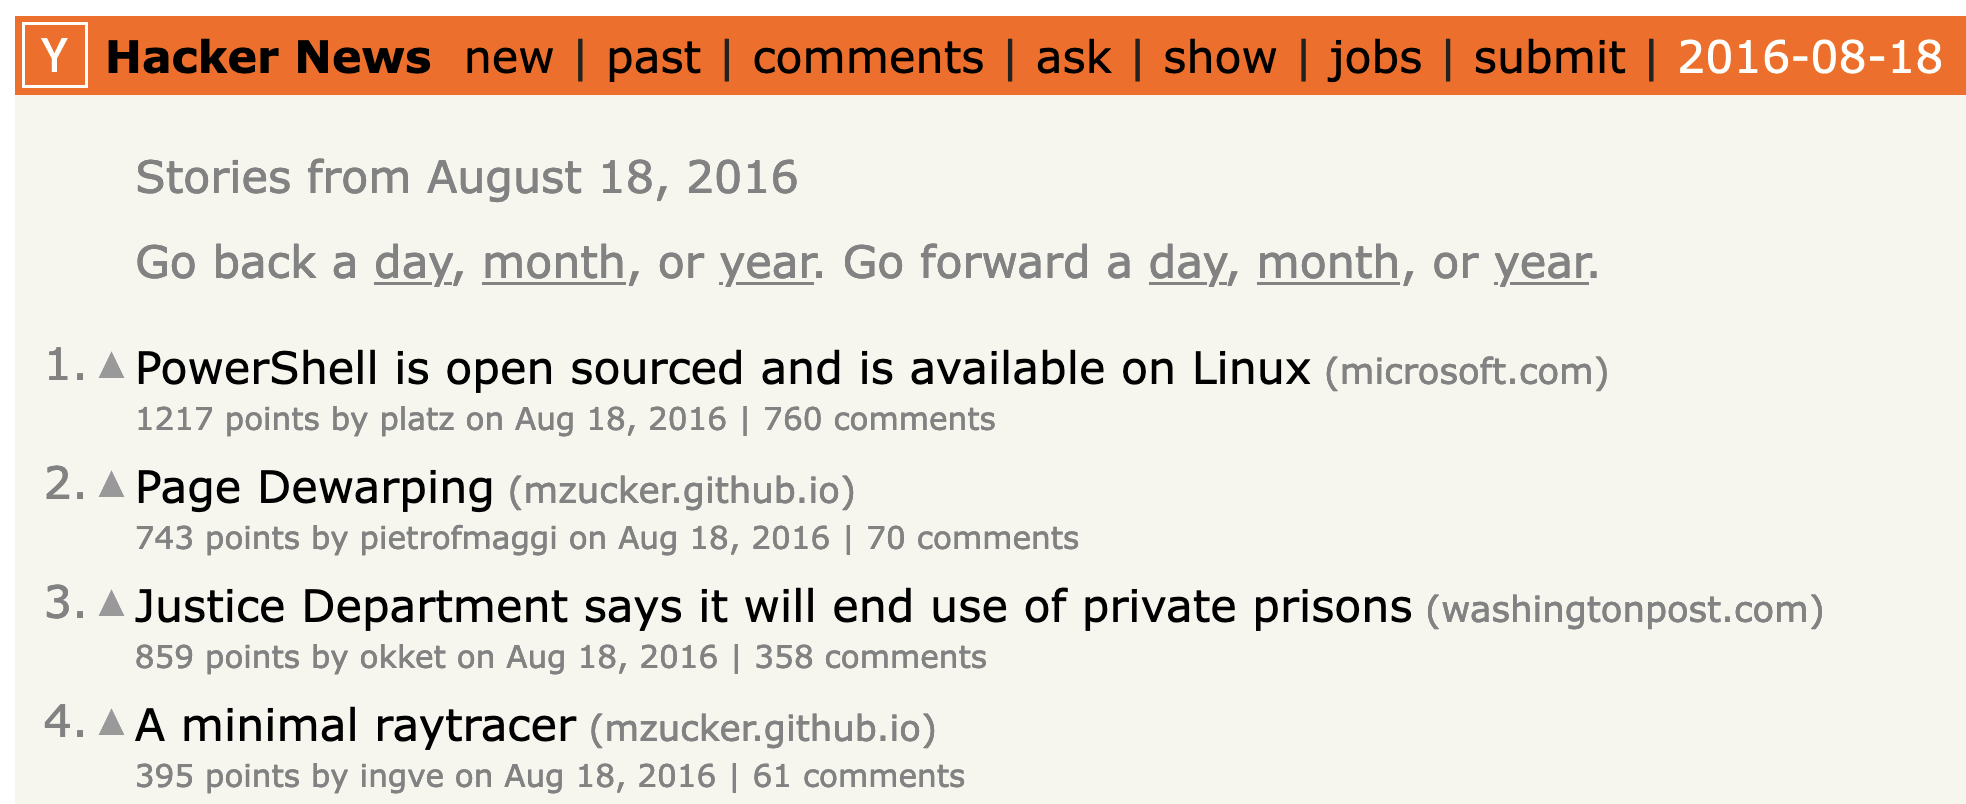 Hacker News links from August 18, 2016